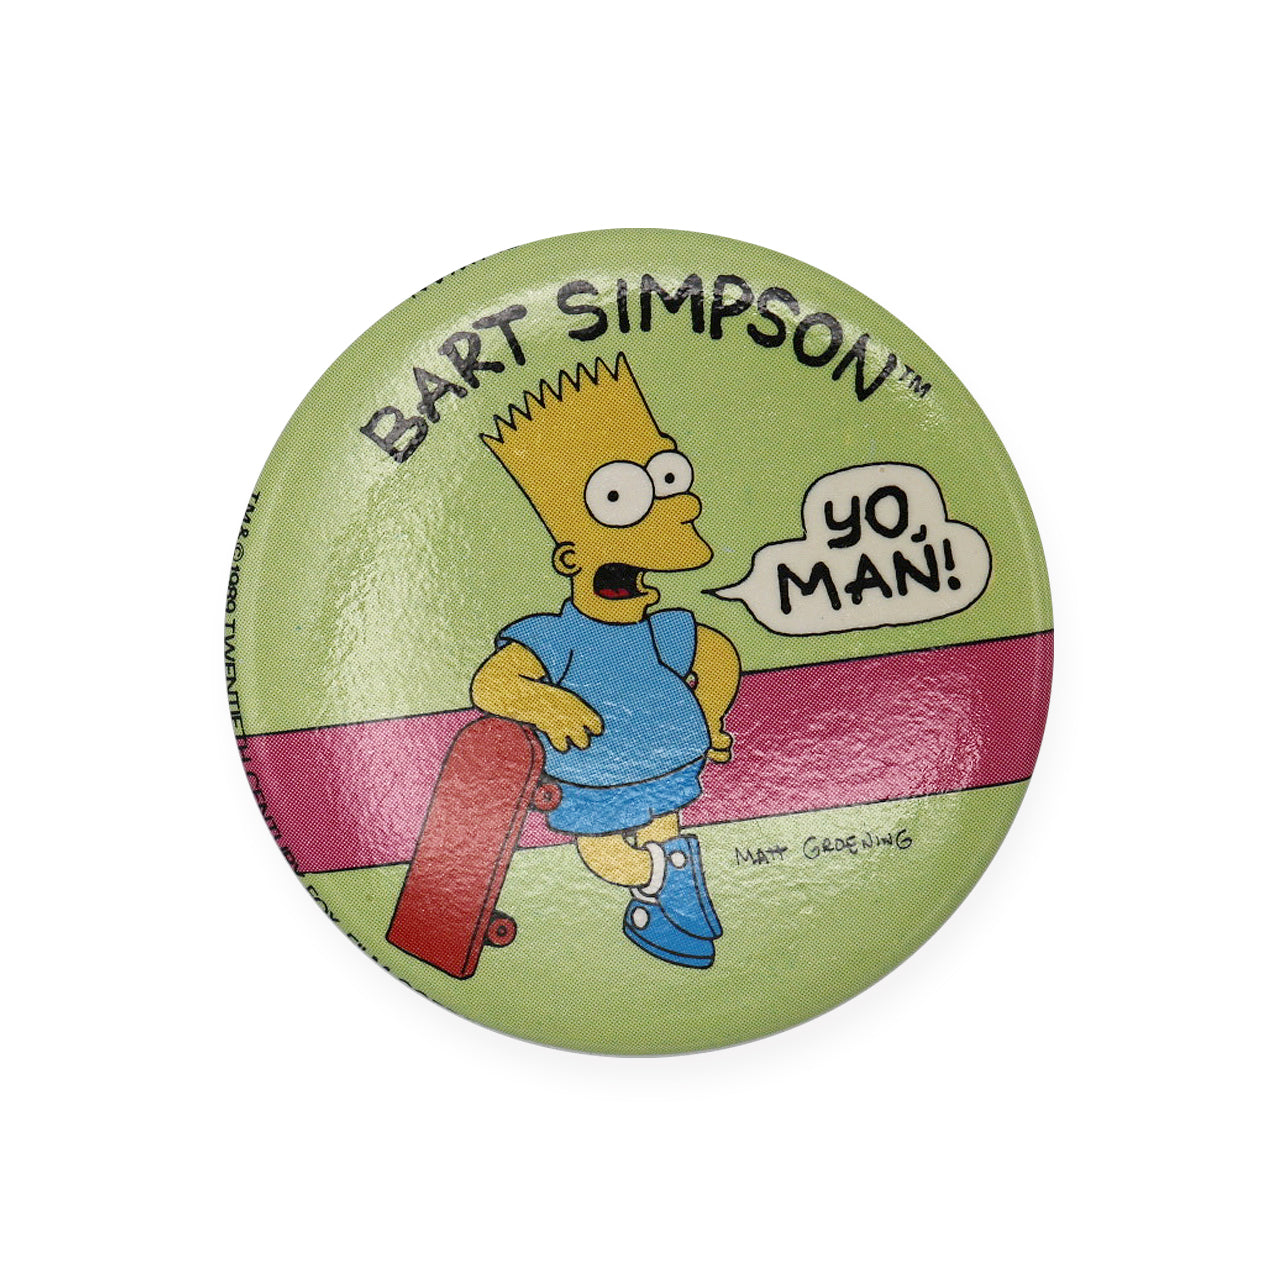 Vintage 1989 The Simpsons Pinback Button.  Add a little flair to your jacket, backpack or tote with this Vintage Yo Man Pinback Button!  Measures 2 inches.  Please note that due to everyone’s monitor displaying differently, the colors you see may vary.